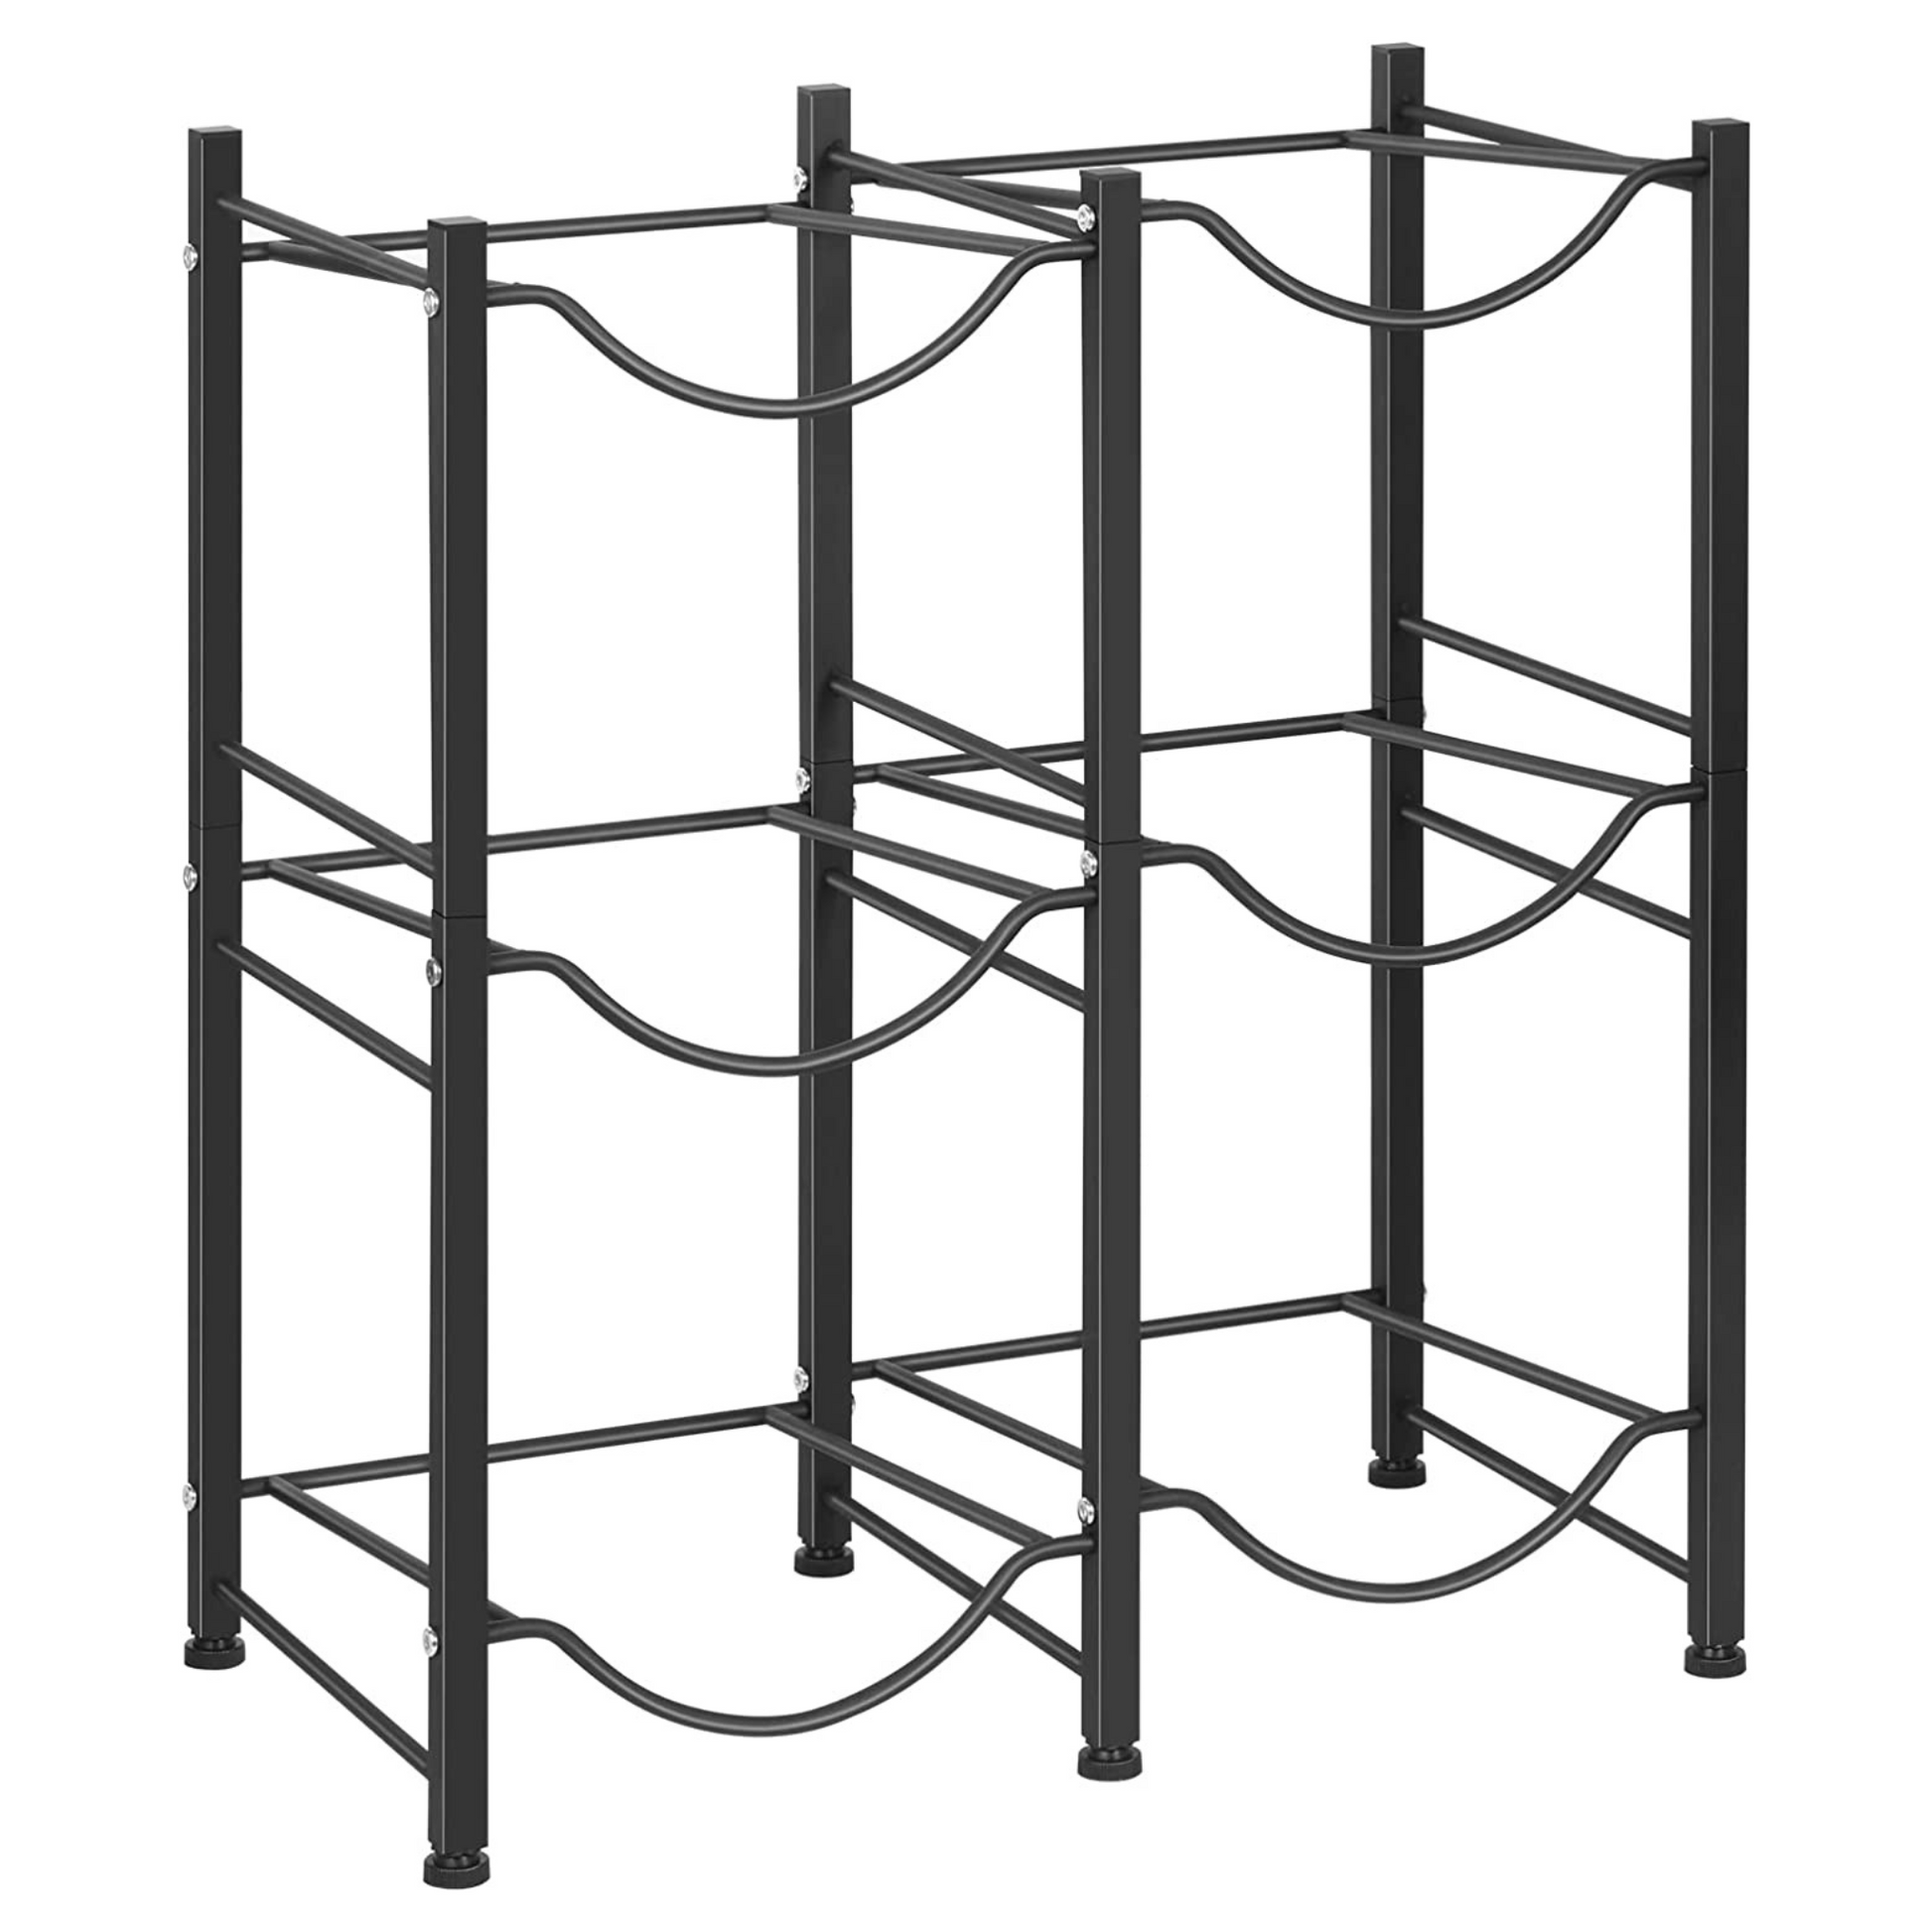 Save valuable floor space while keeping your home or office organized with this 3-tier double 5-gallon water bottle rack. Made of durable steel with black paint, it measures 24.8” x 12.9” x 29.1” (LWH) and can hold up to 6 water gallon jugs at one time. Its adjustable screw feet provide stability and prevent floor damage.